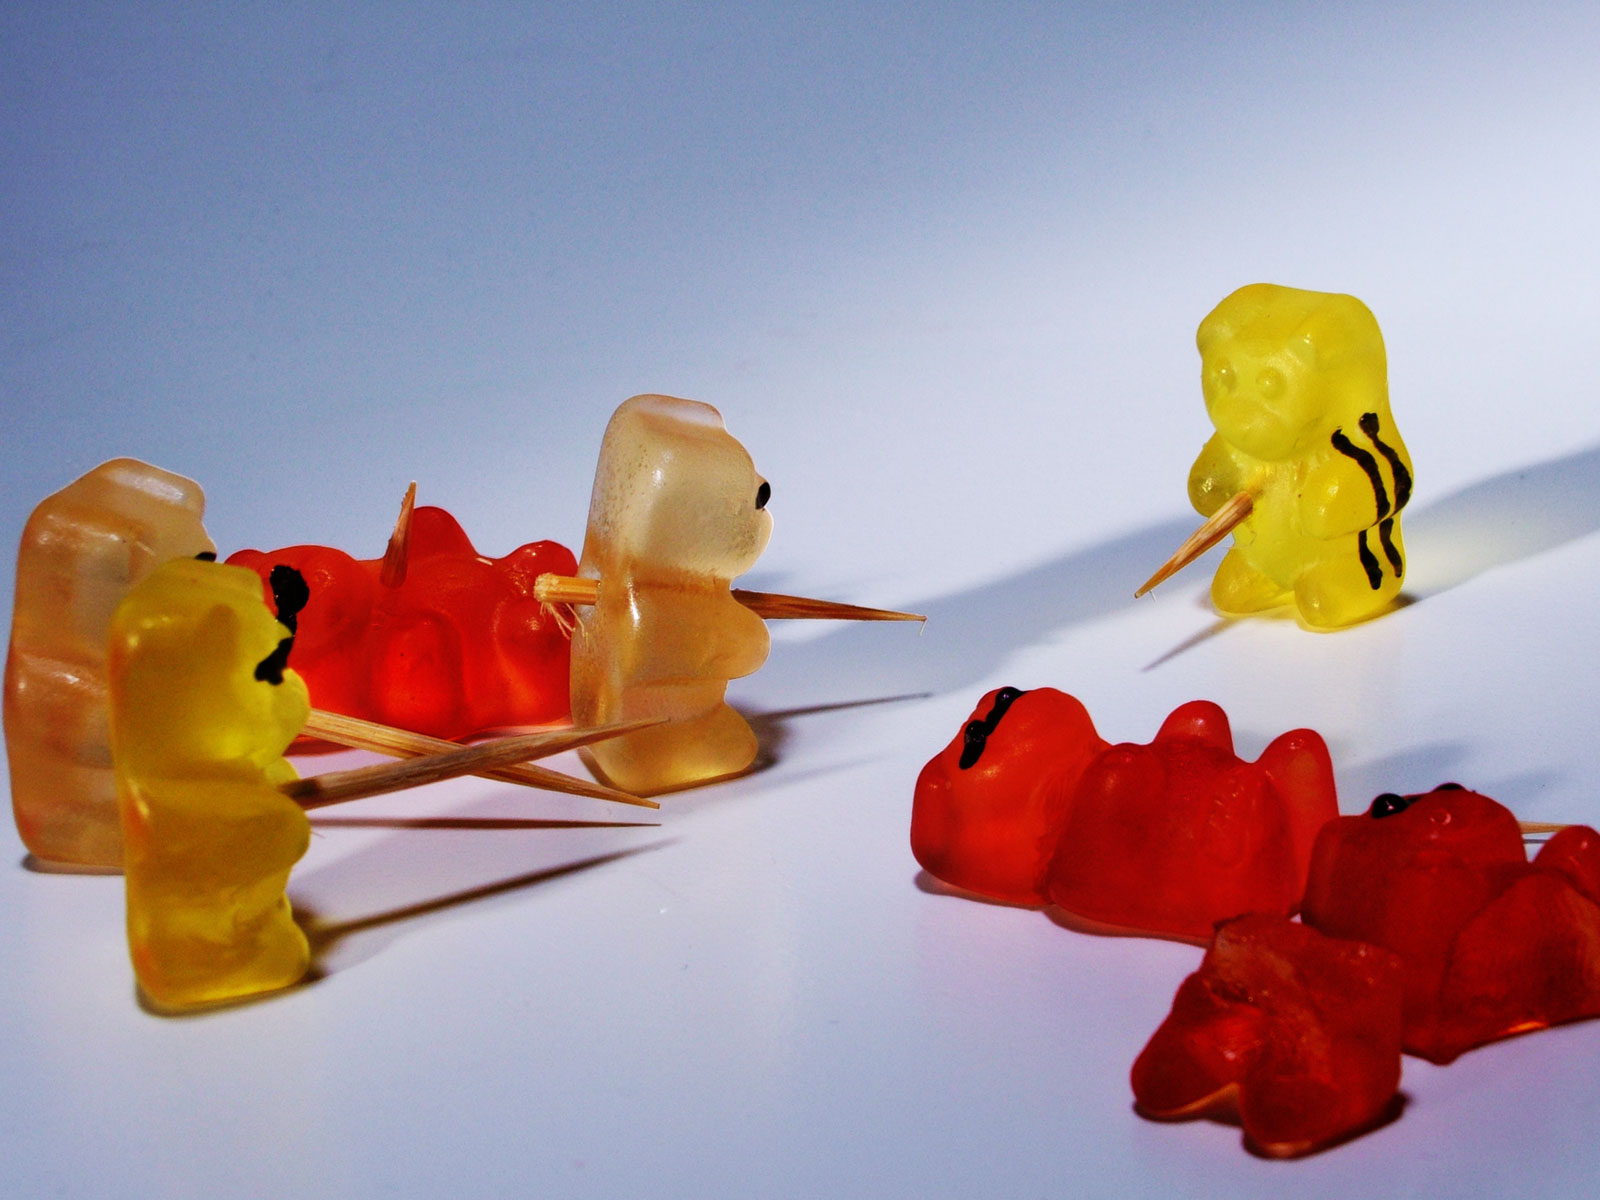 Gummy Bears engaging in a battle